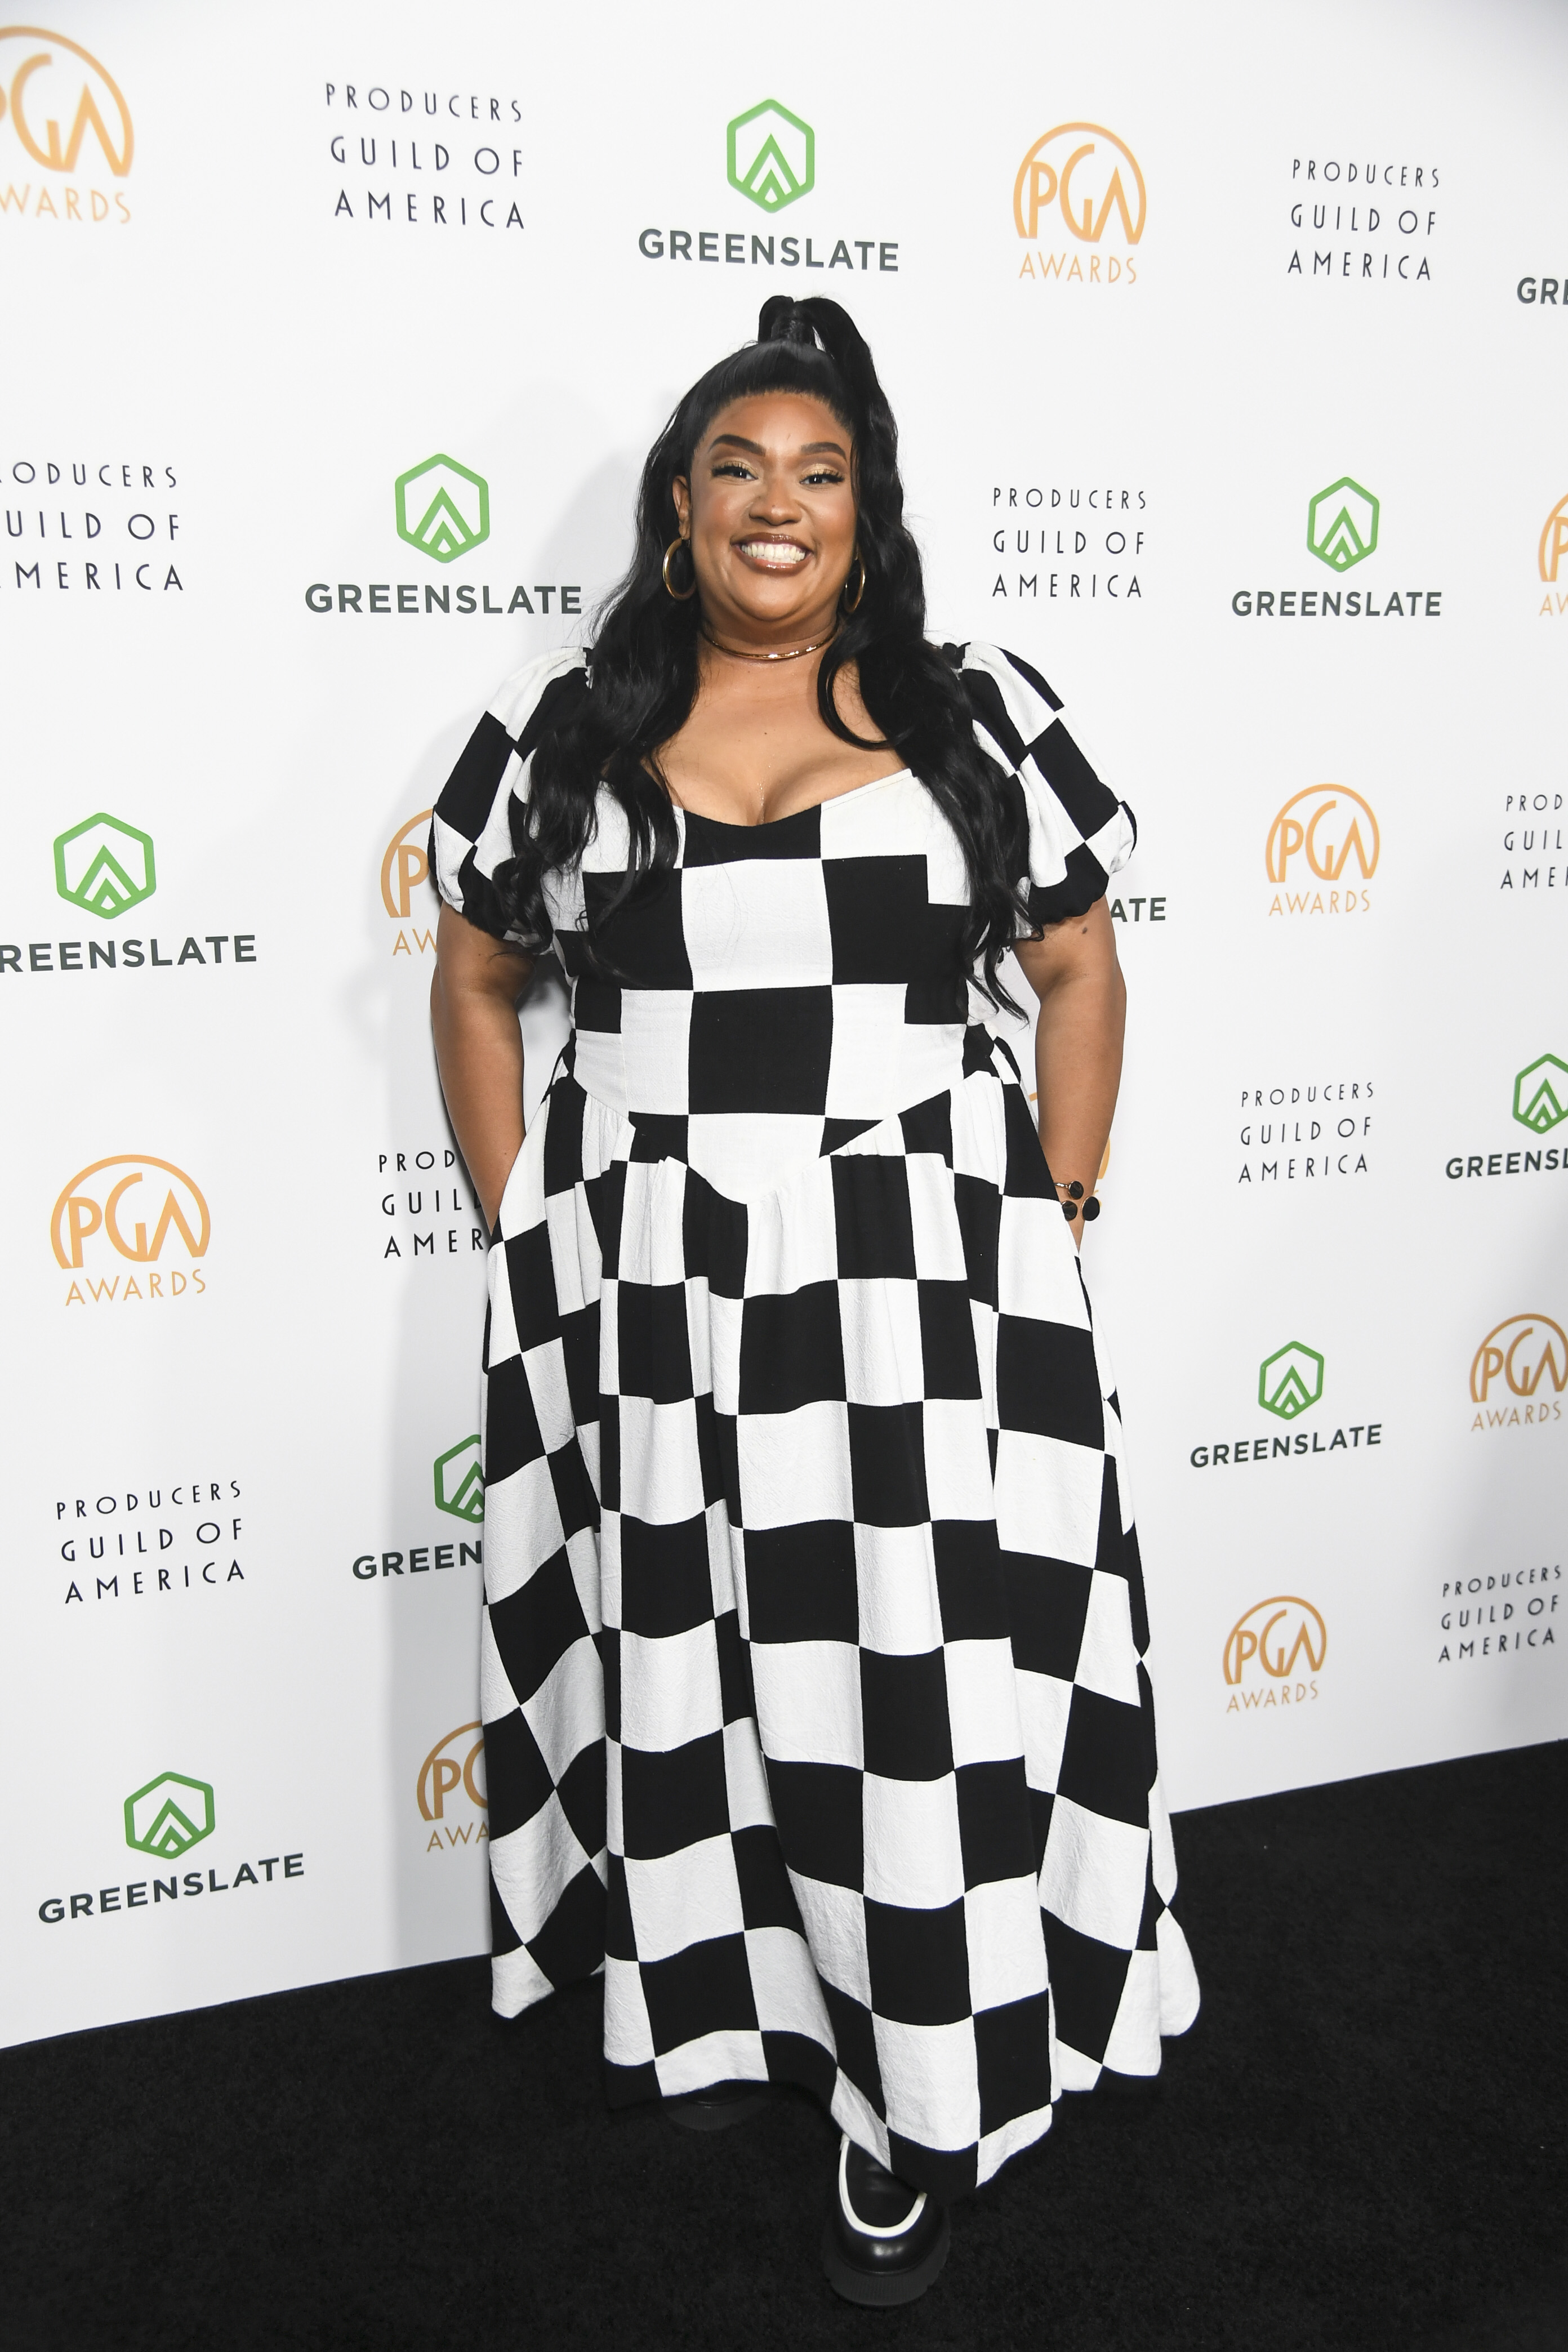 X Mayo in a checkered gown poses at the Producers Guild Awards